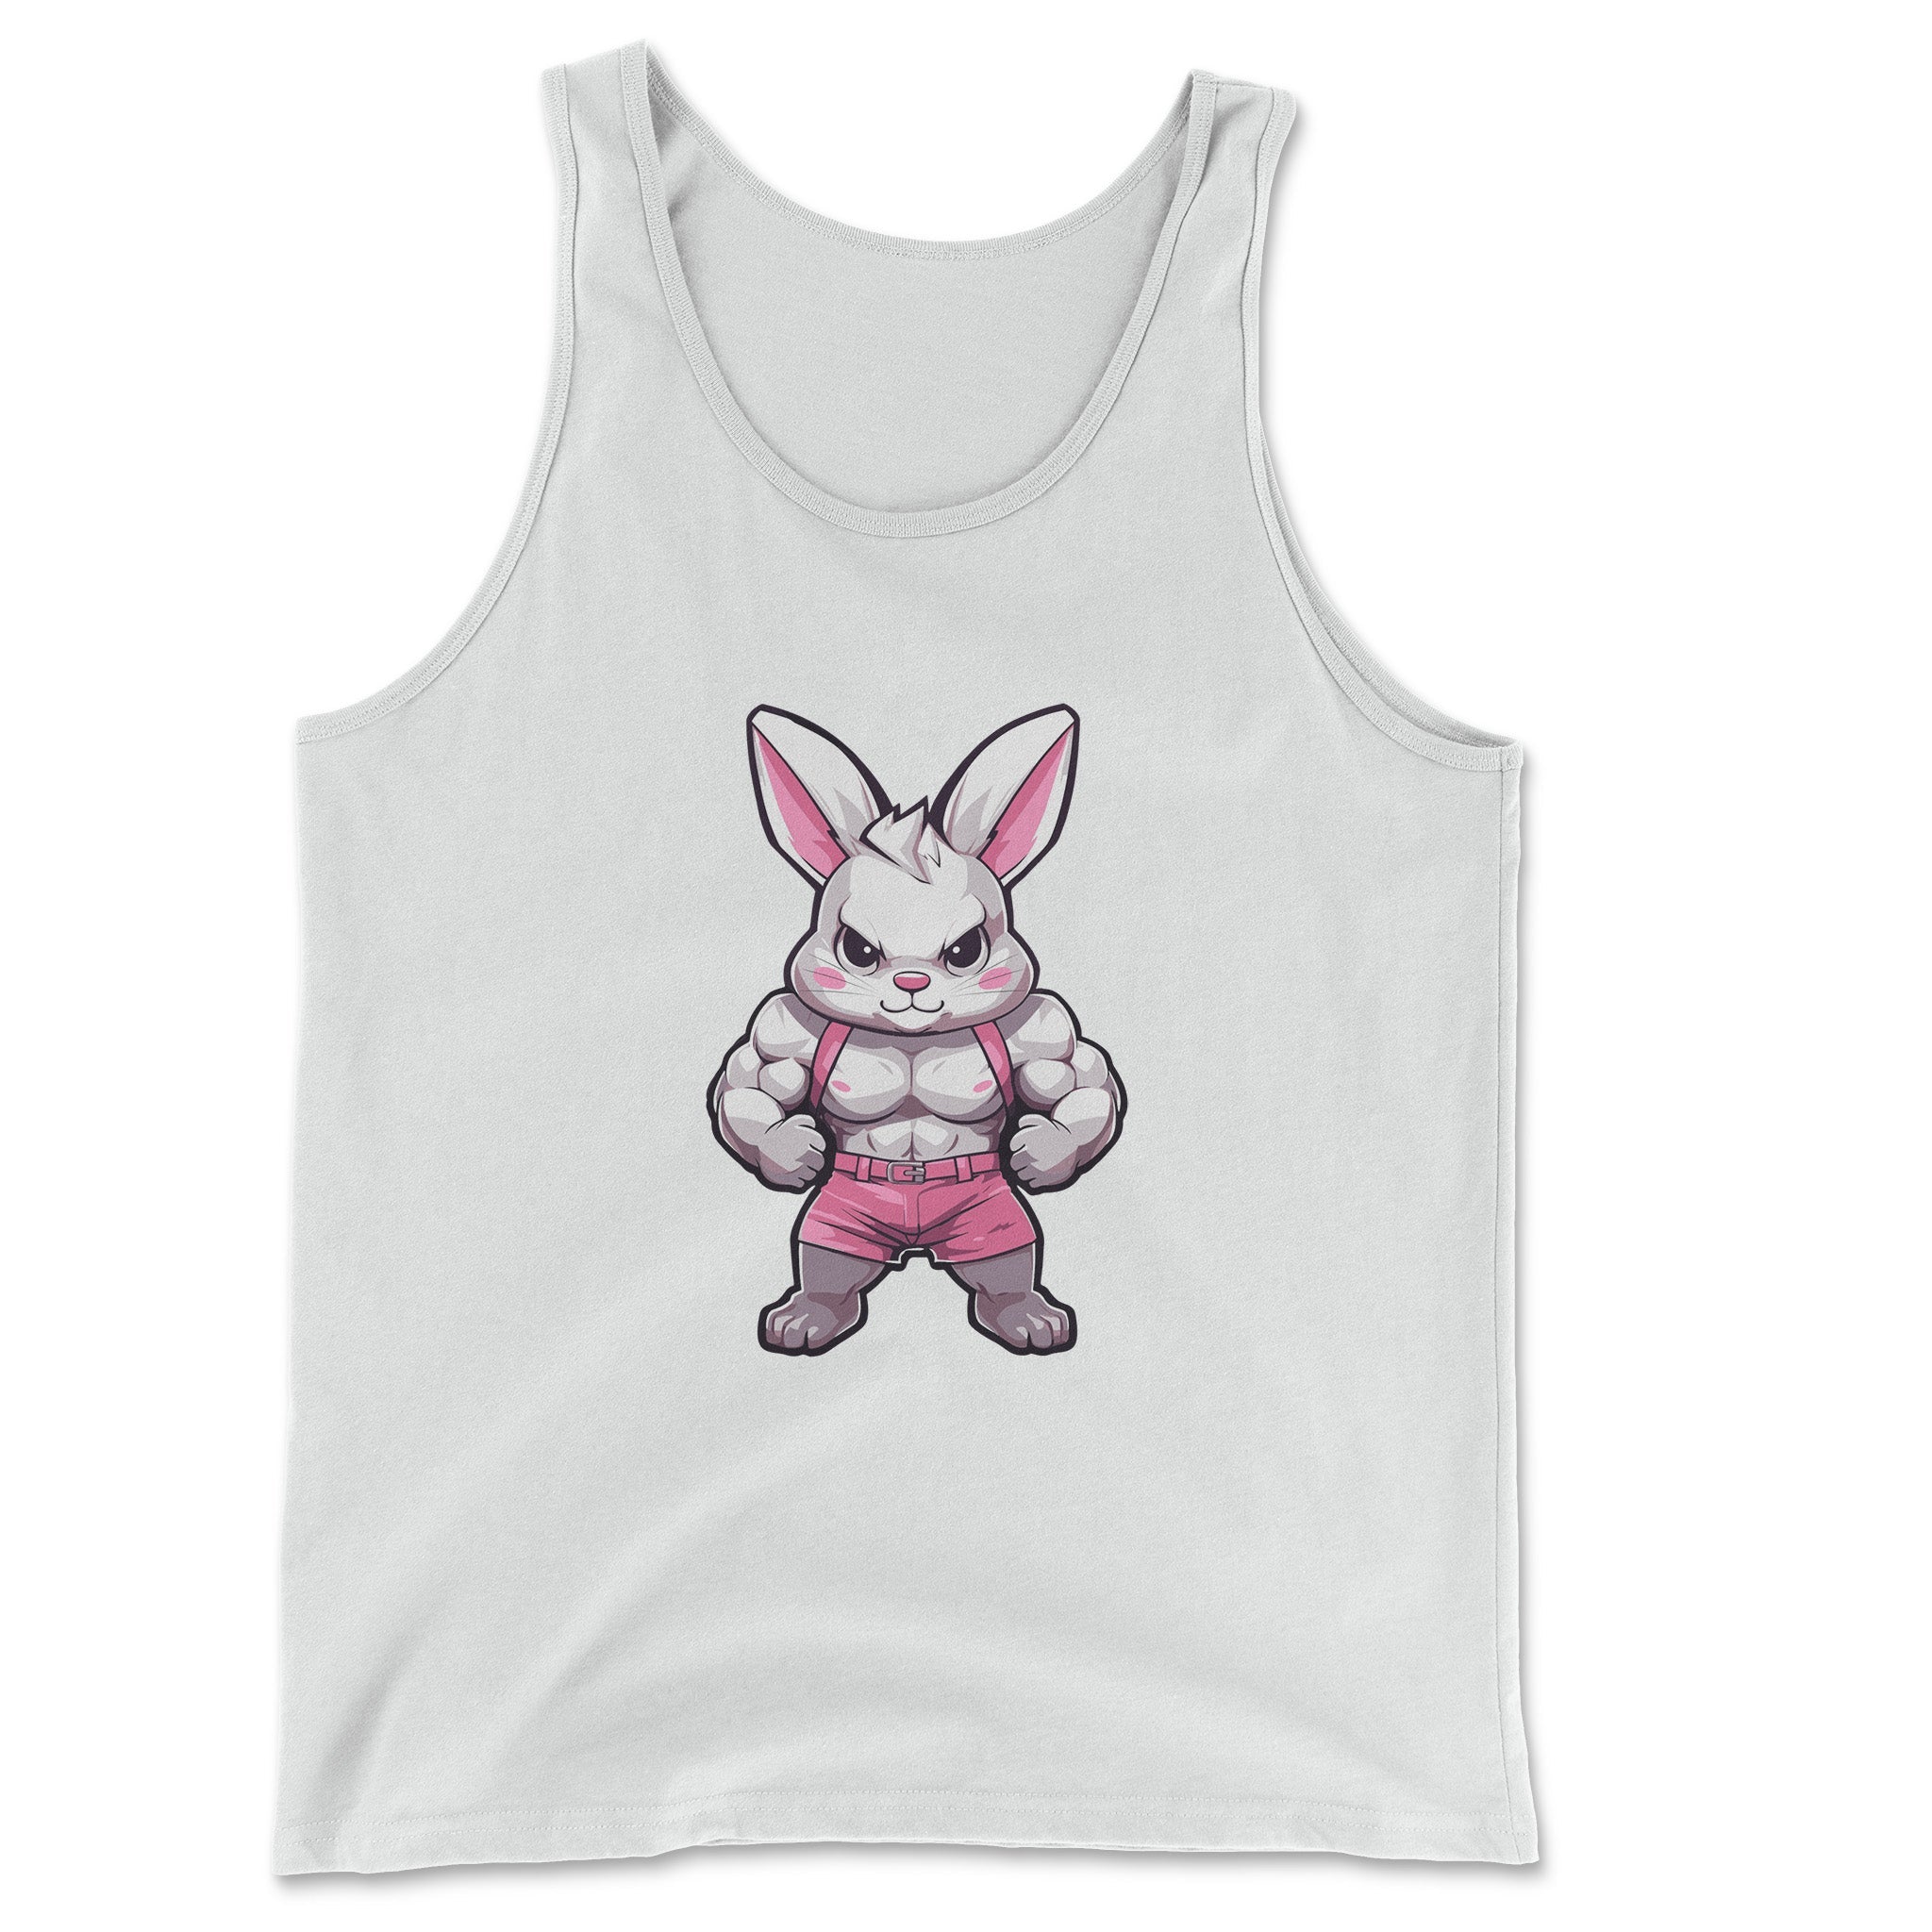 Gym Bunny Tank Top: Show Your Strength! - Hunky Tops#color_white